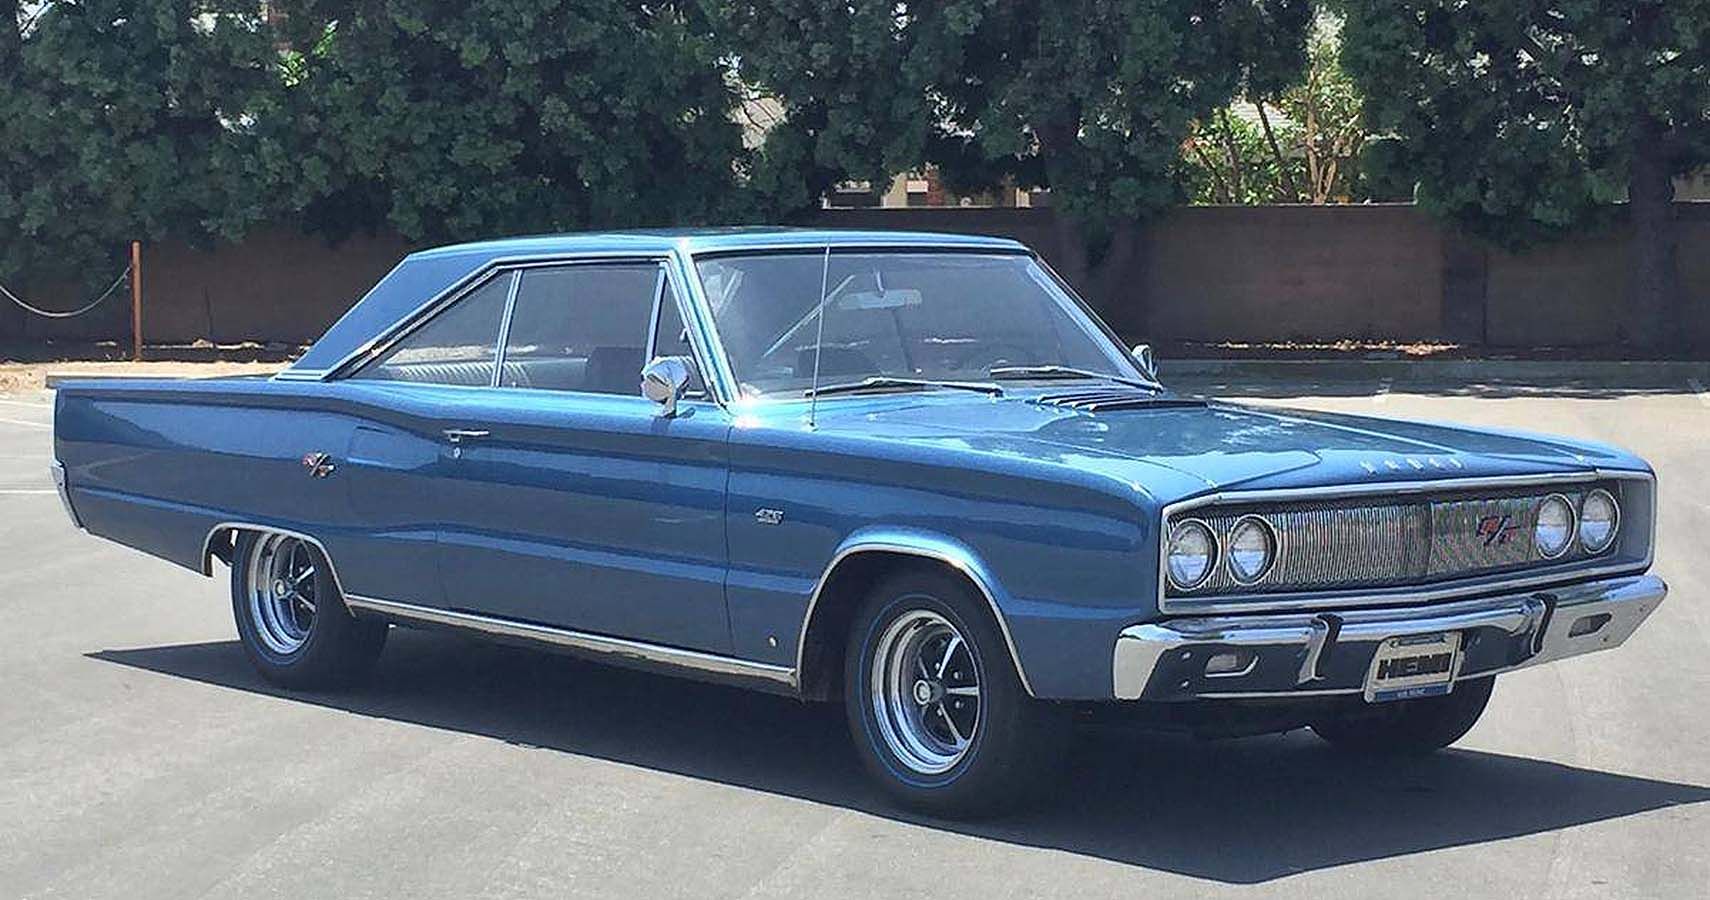 A blue Dodge Coronet R/T version from 1967